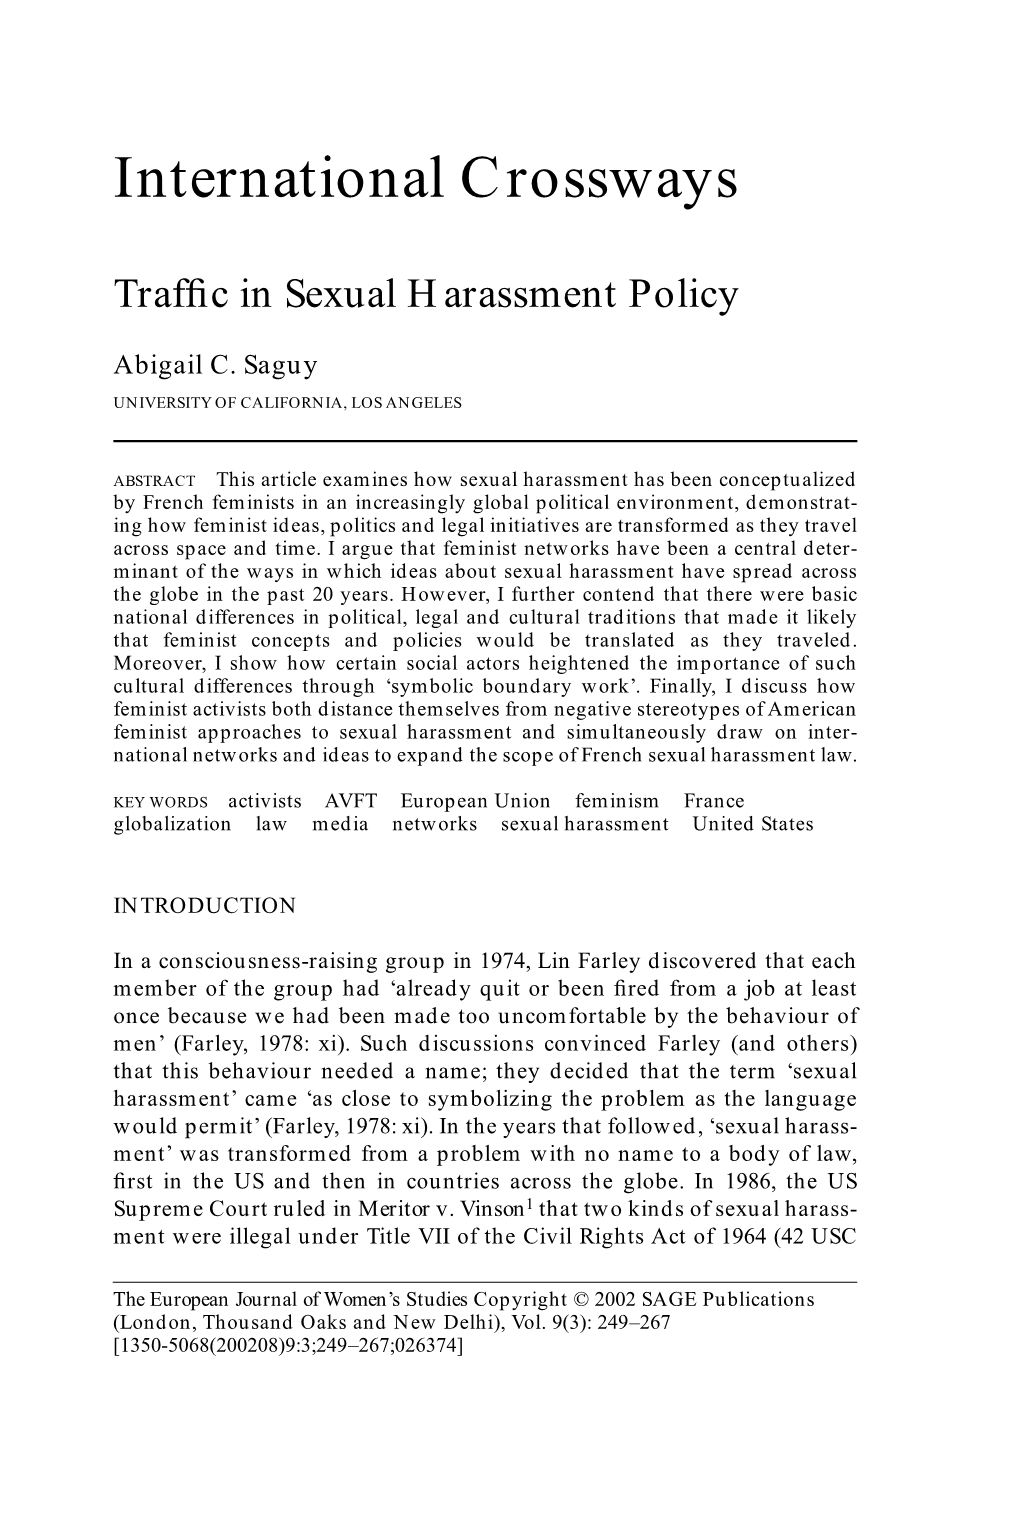 International Crossways: Traffic in Sexual Harassment Policy